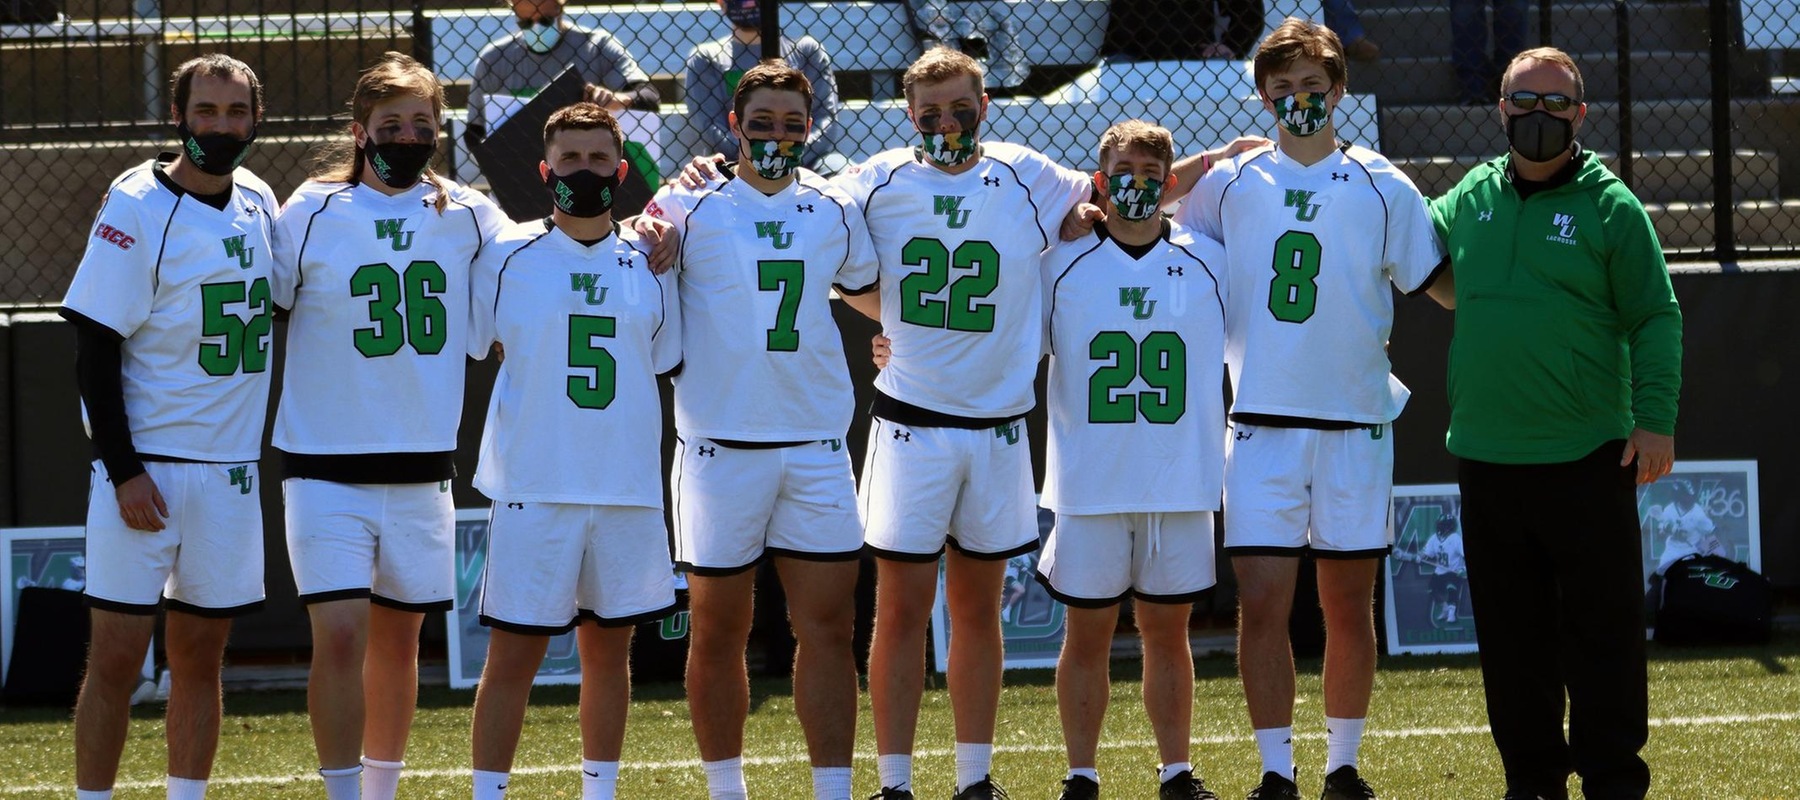 Photo of Senior Day festivities following the game against Caldwell. Copyright 2021; Wilmington University. All rights reserved. Photo by Erin Harvey.